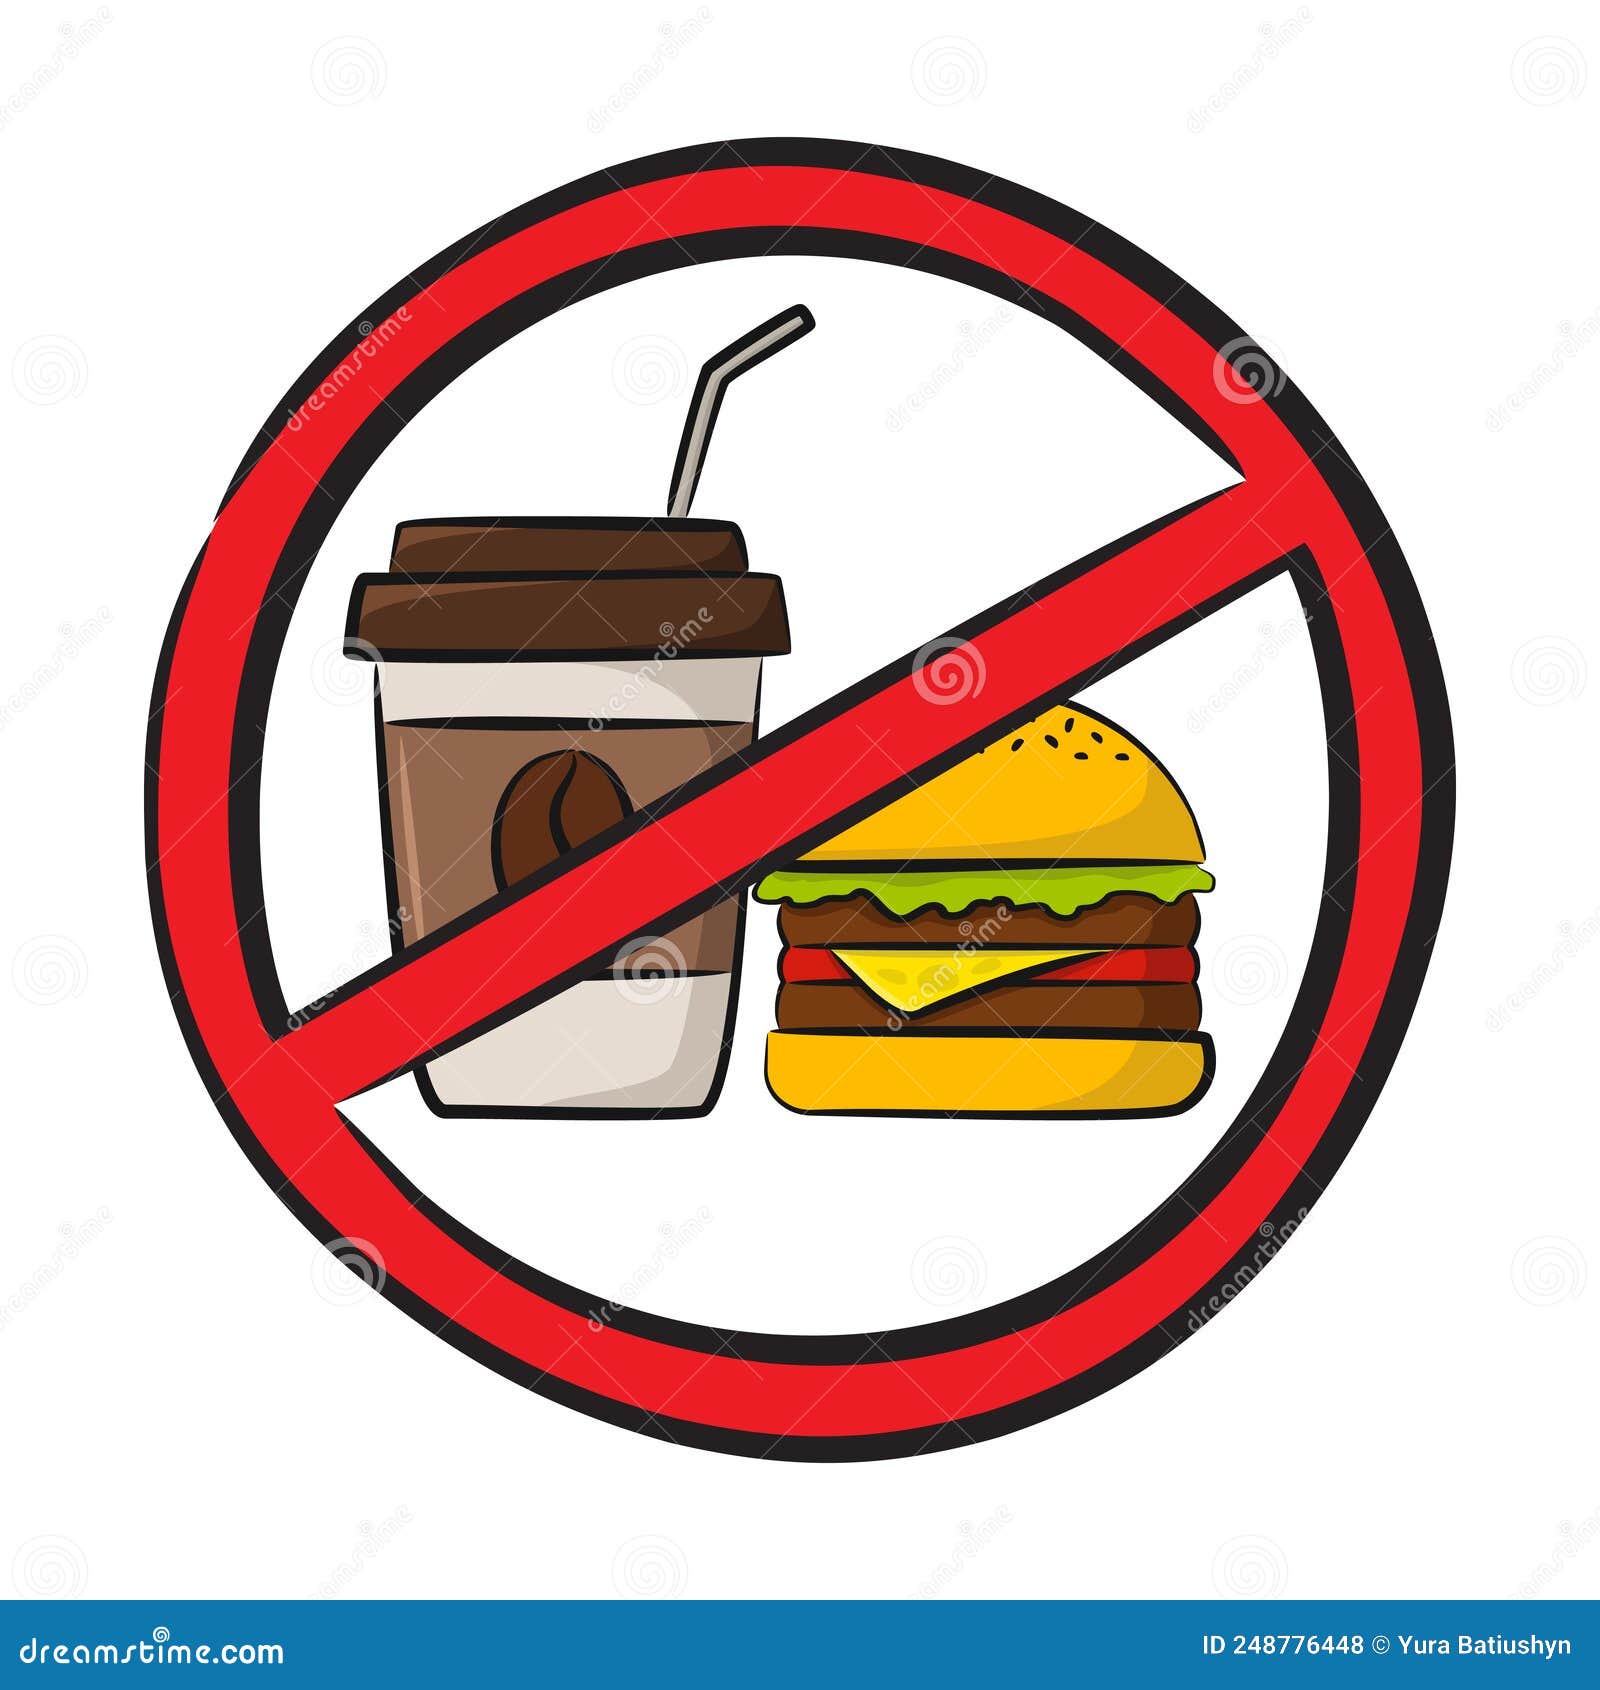 the sign prohibits the use of food